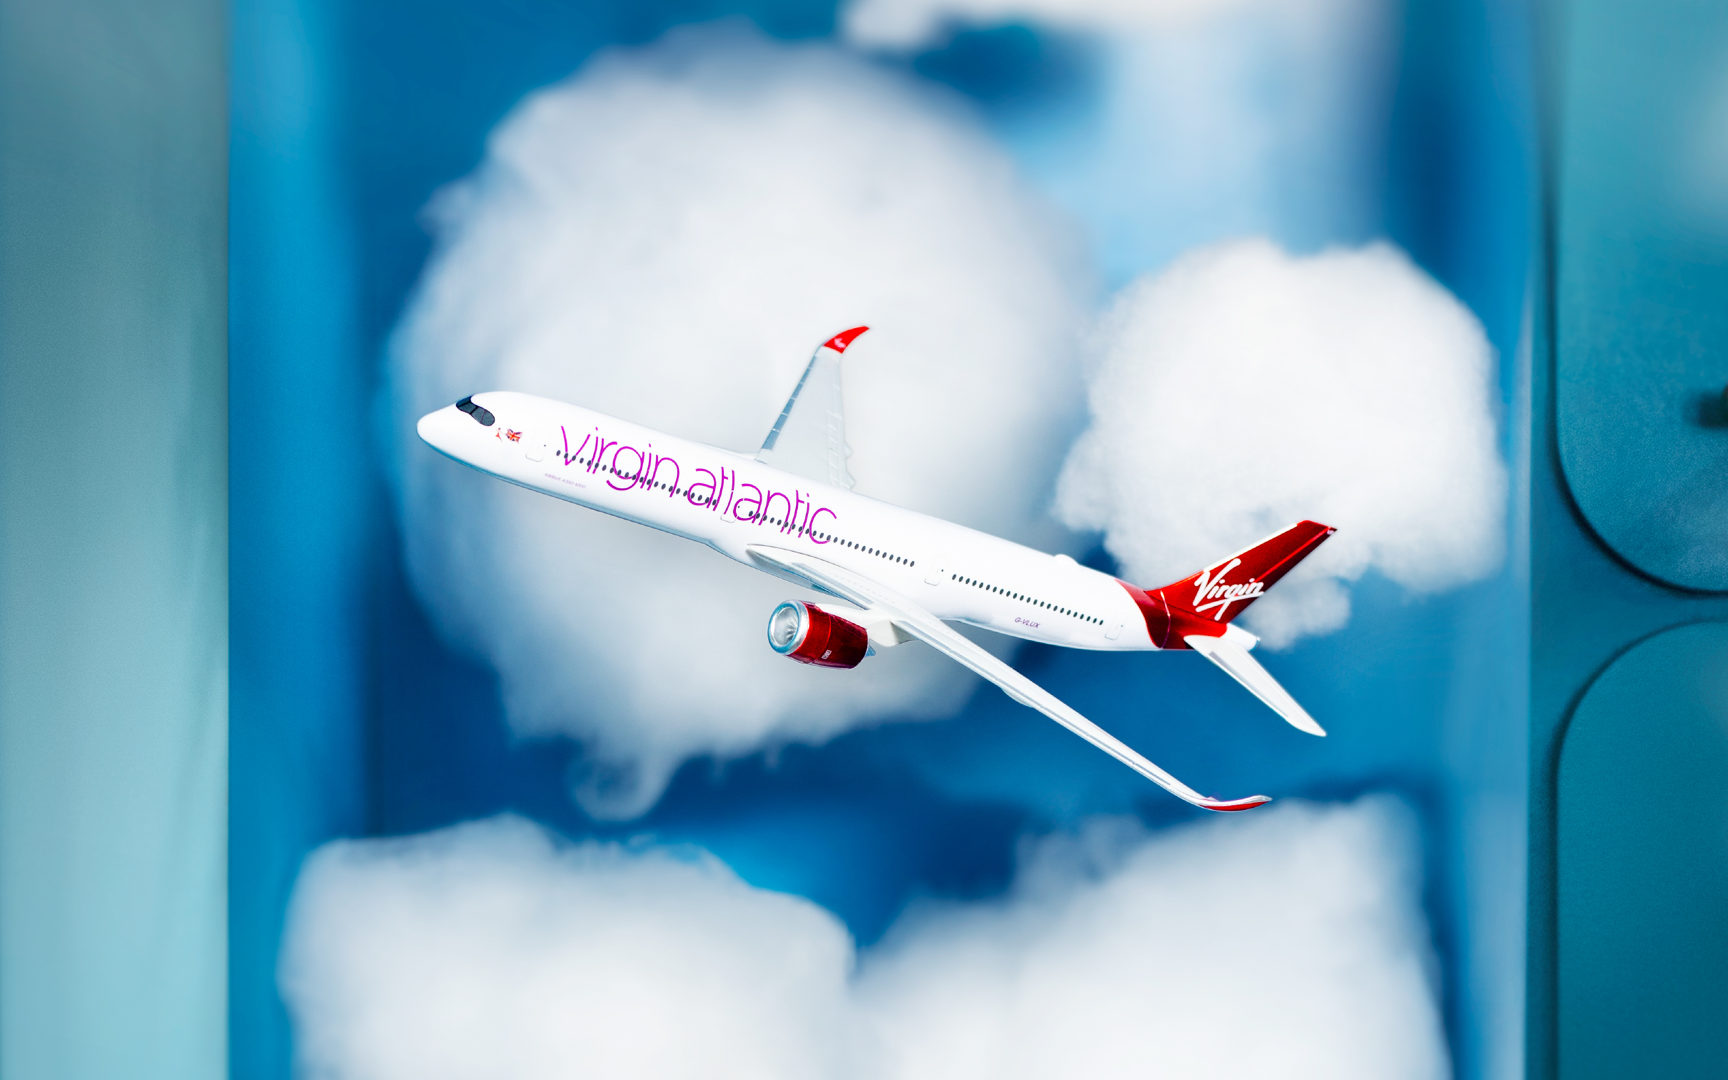 Image of a toy Virgin Atlantic aircraft flying through clouds.